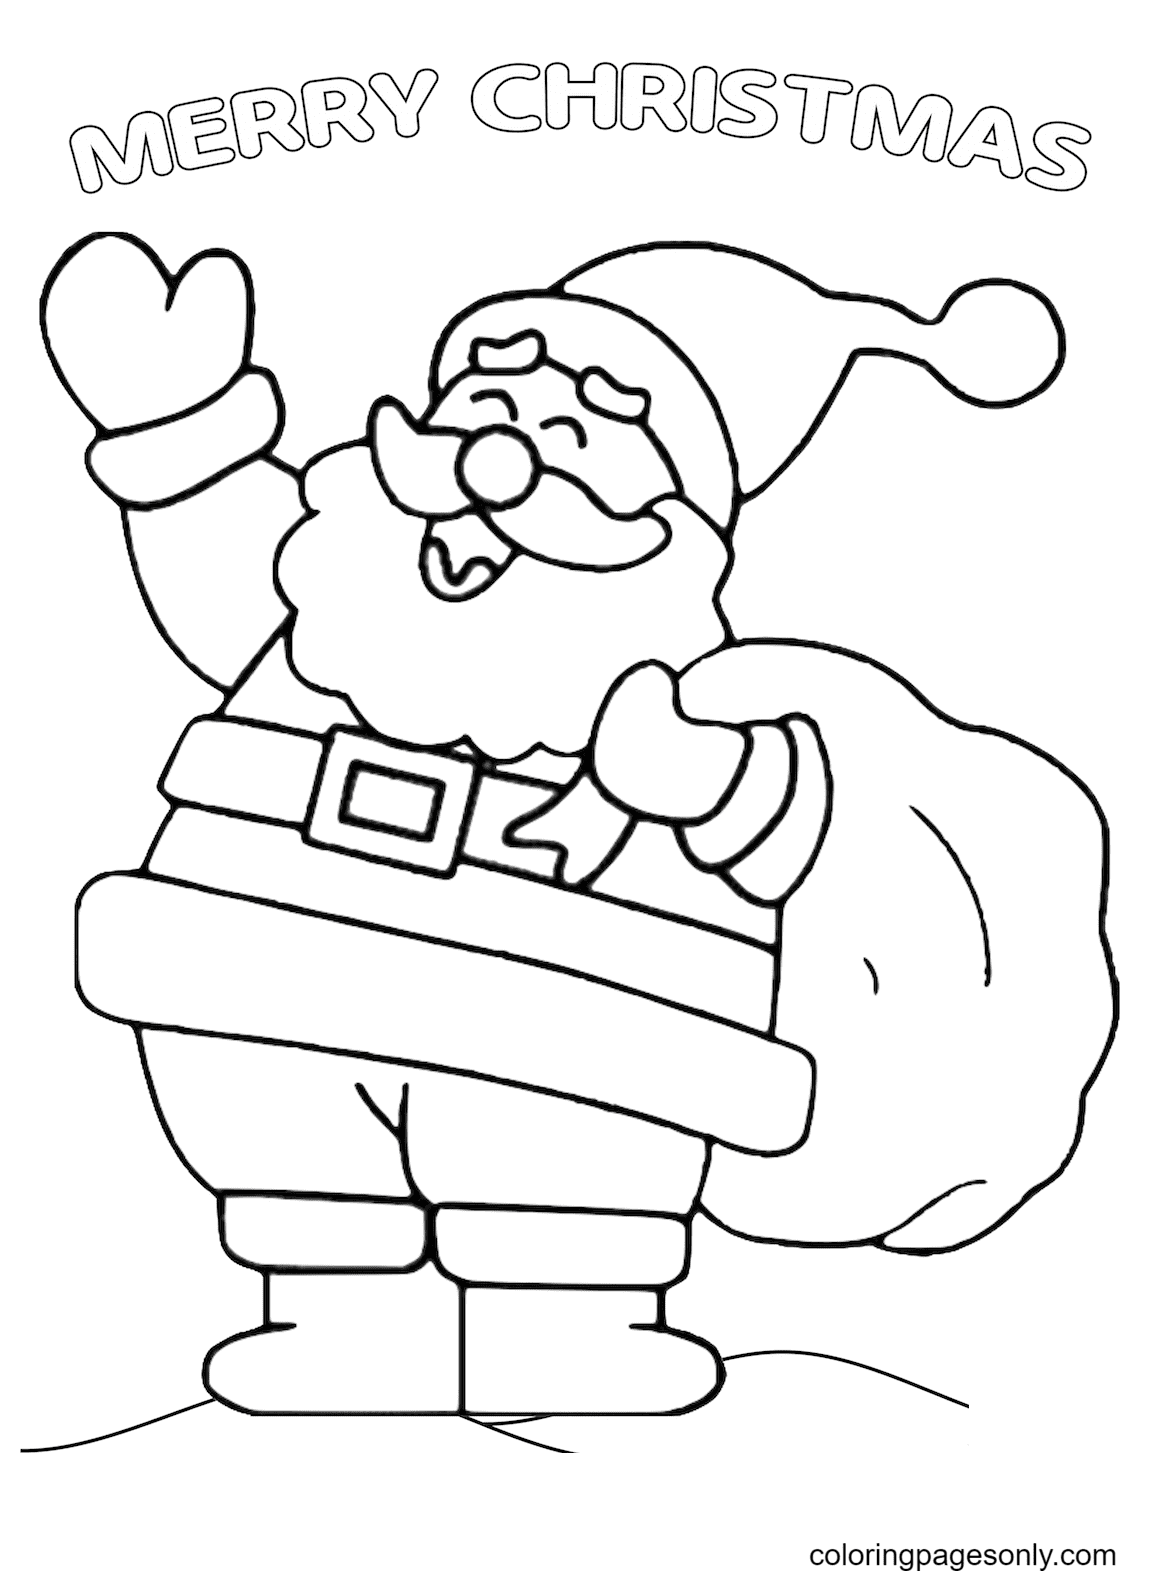 Kind and Awesome Santa Claus Coloring Pages